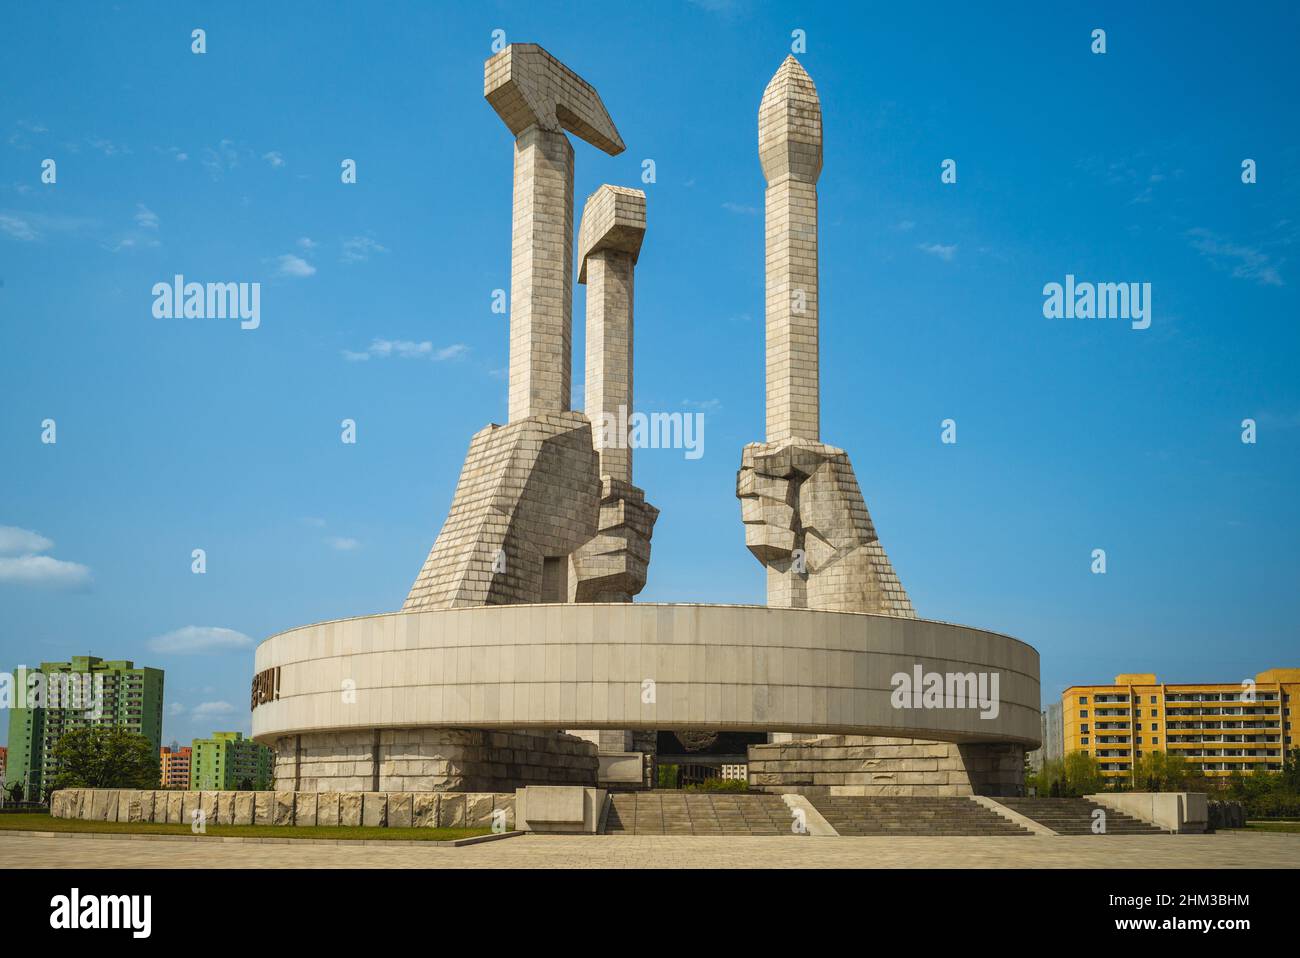 April 29, 2019: Monument to Party Founding, which was completed on 10 October 1995 and is located at Pyongyang, North Korea. The element symbolizes th Stock Photo